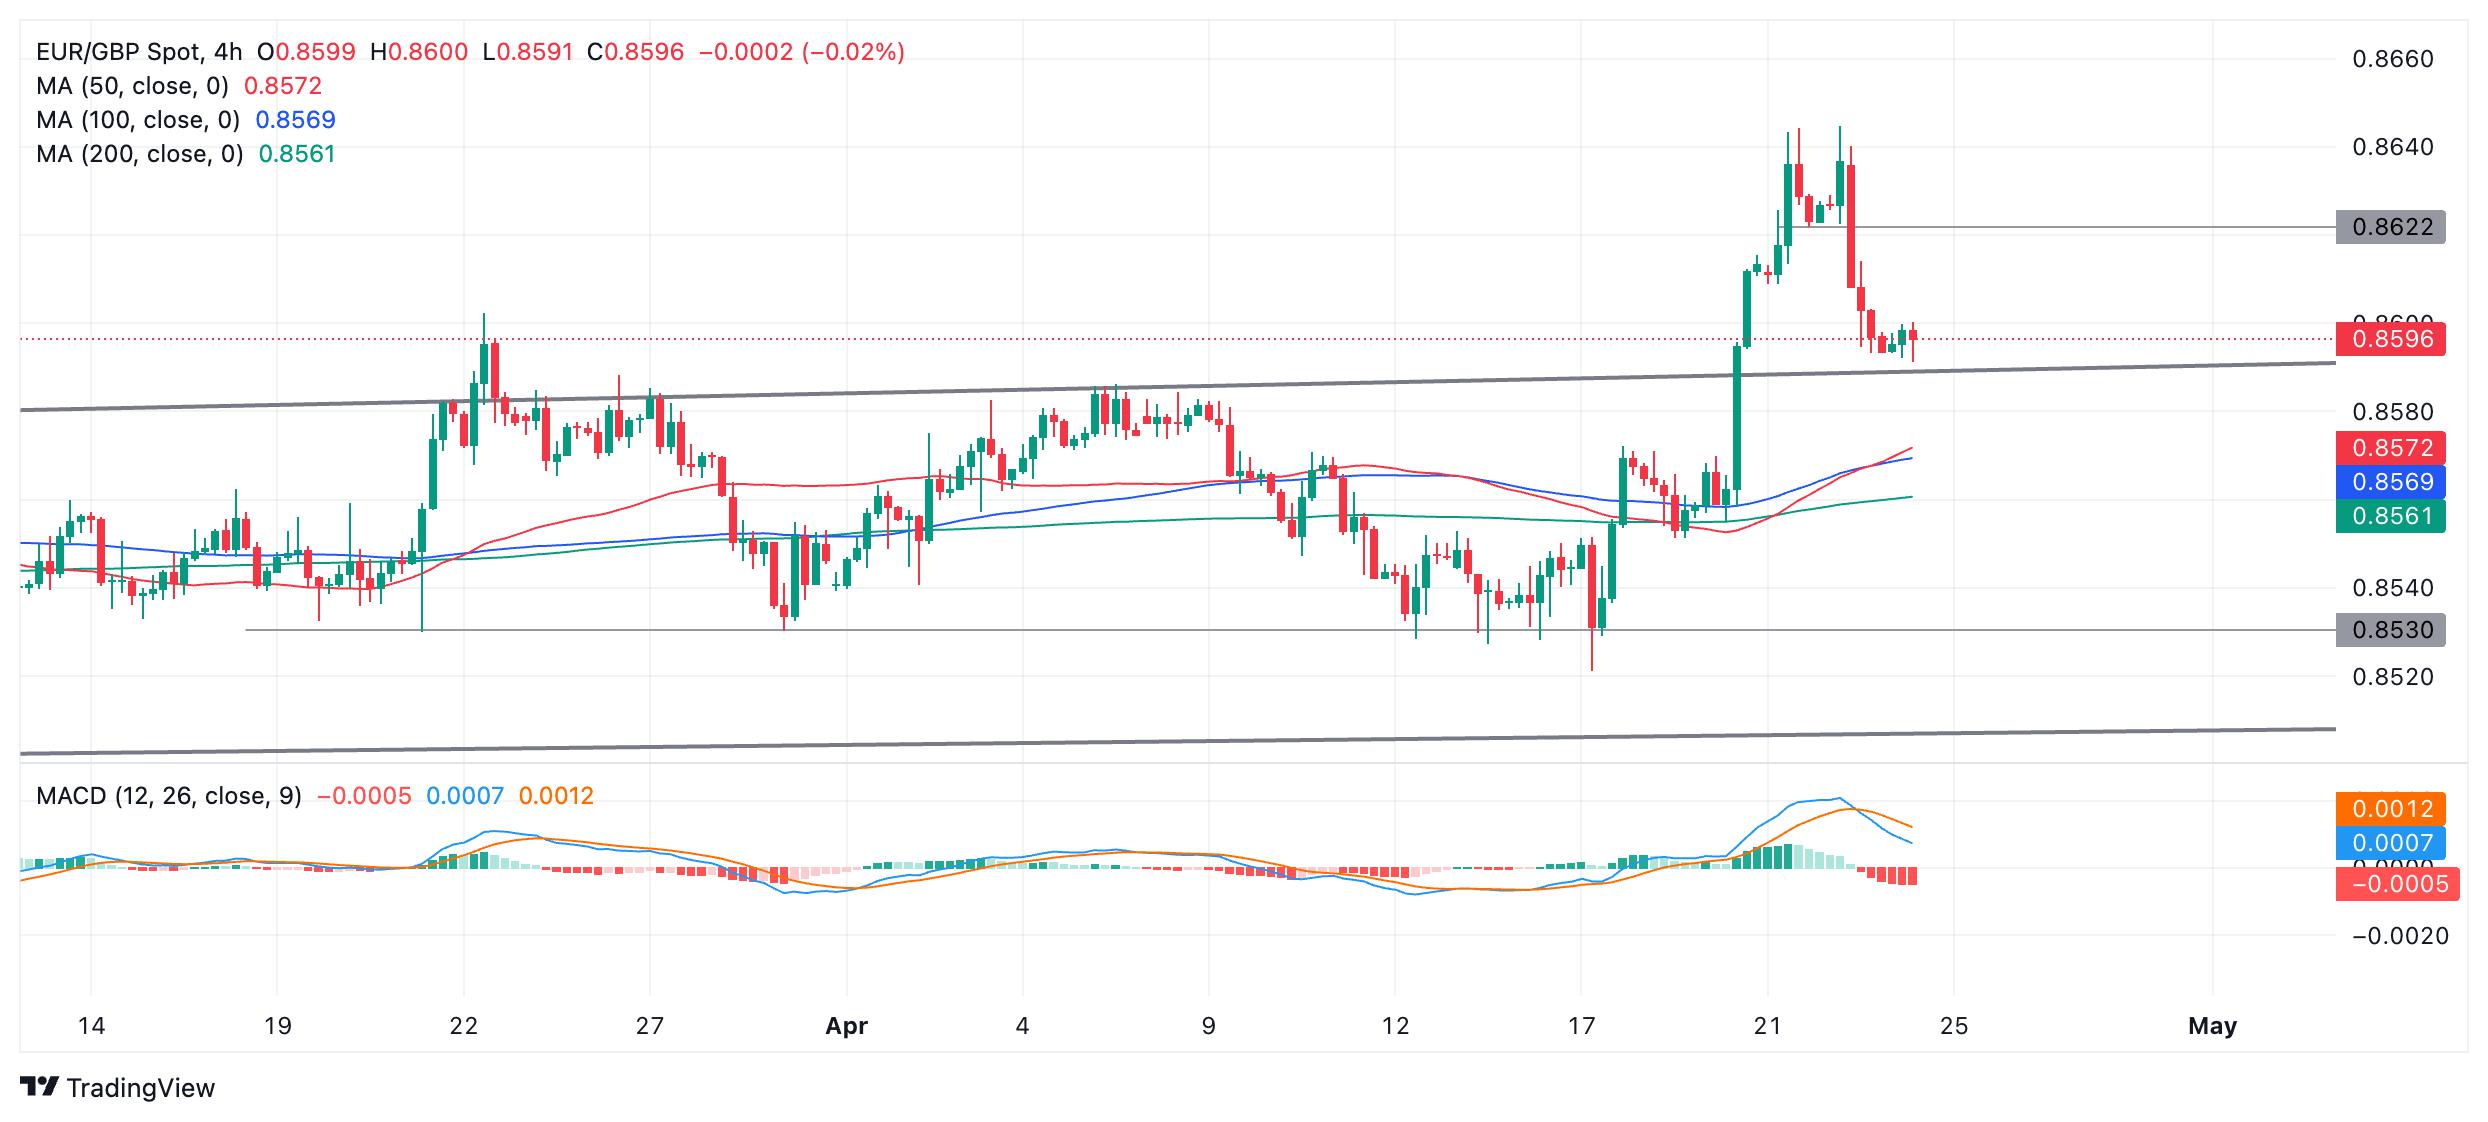 EUR/GBP Price Analysis: Downmove reaches critical support level